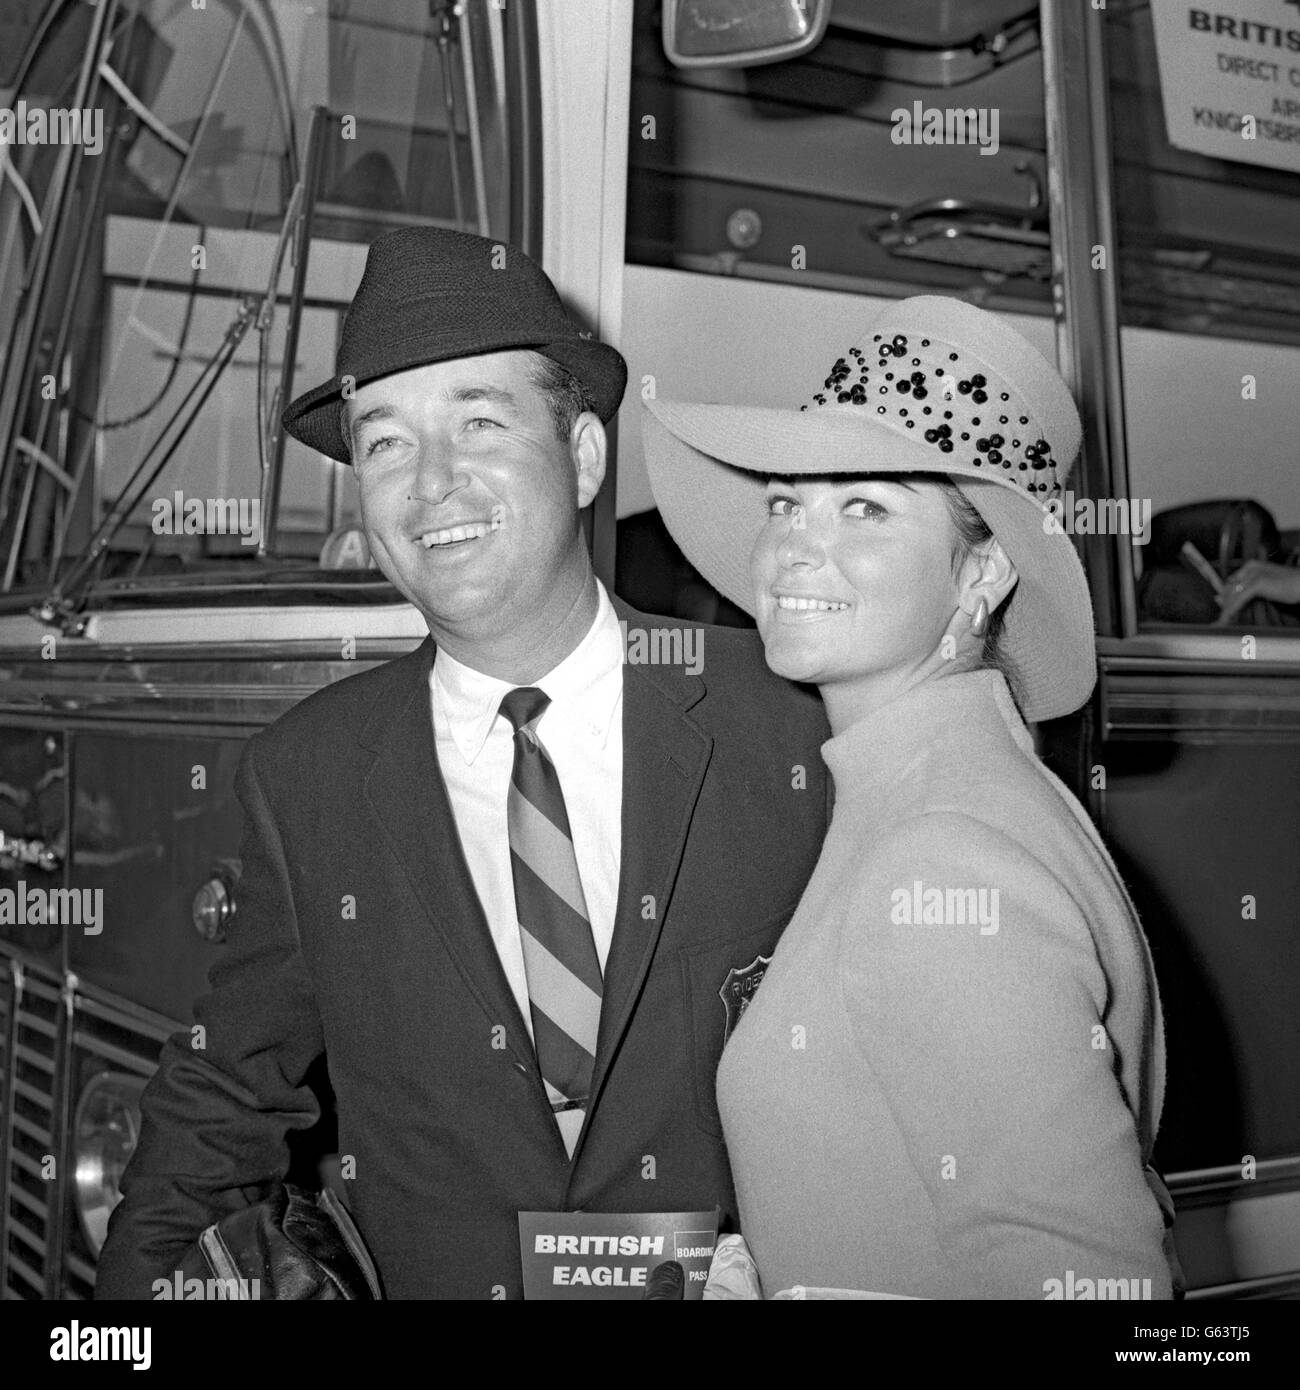 American Ryder Cup golfer Ken Venturi and his wife, Connie, after arriving from a BOAC-Cunard airliner at London Airport. The Ryder Cup match is at Royal Birkdale. Stock Photo